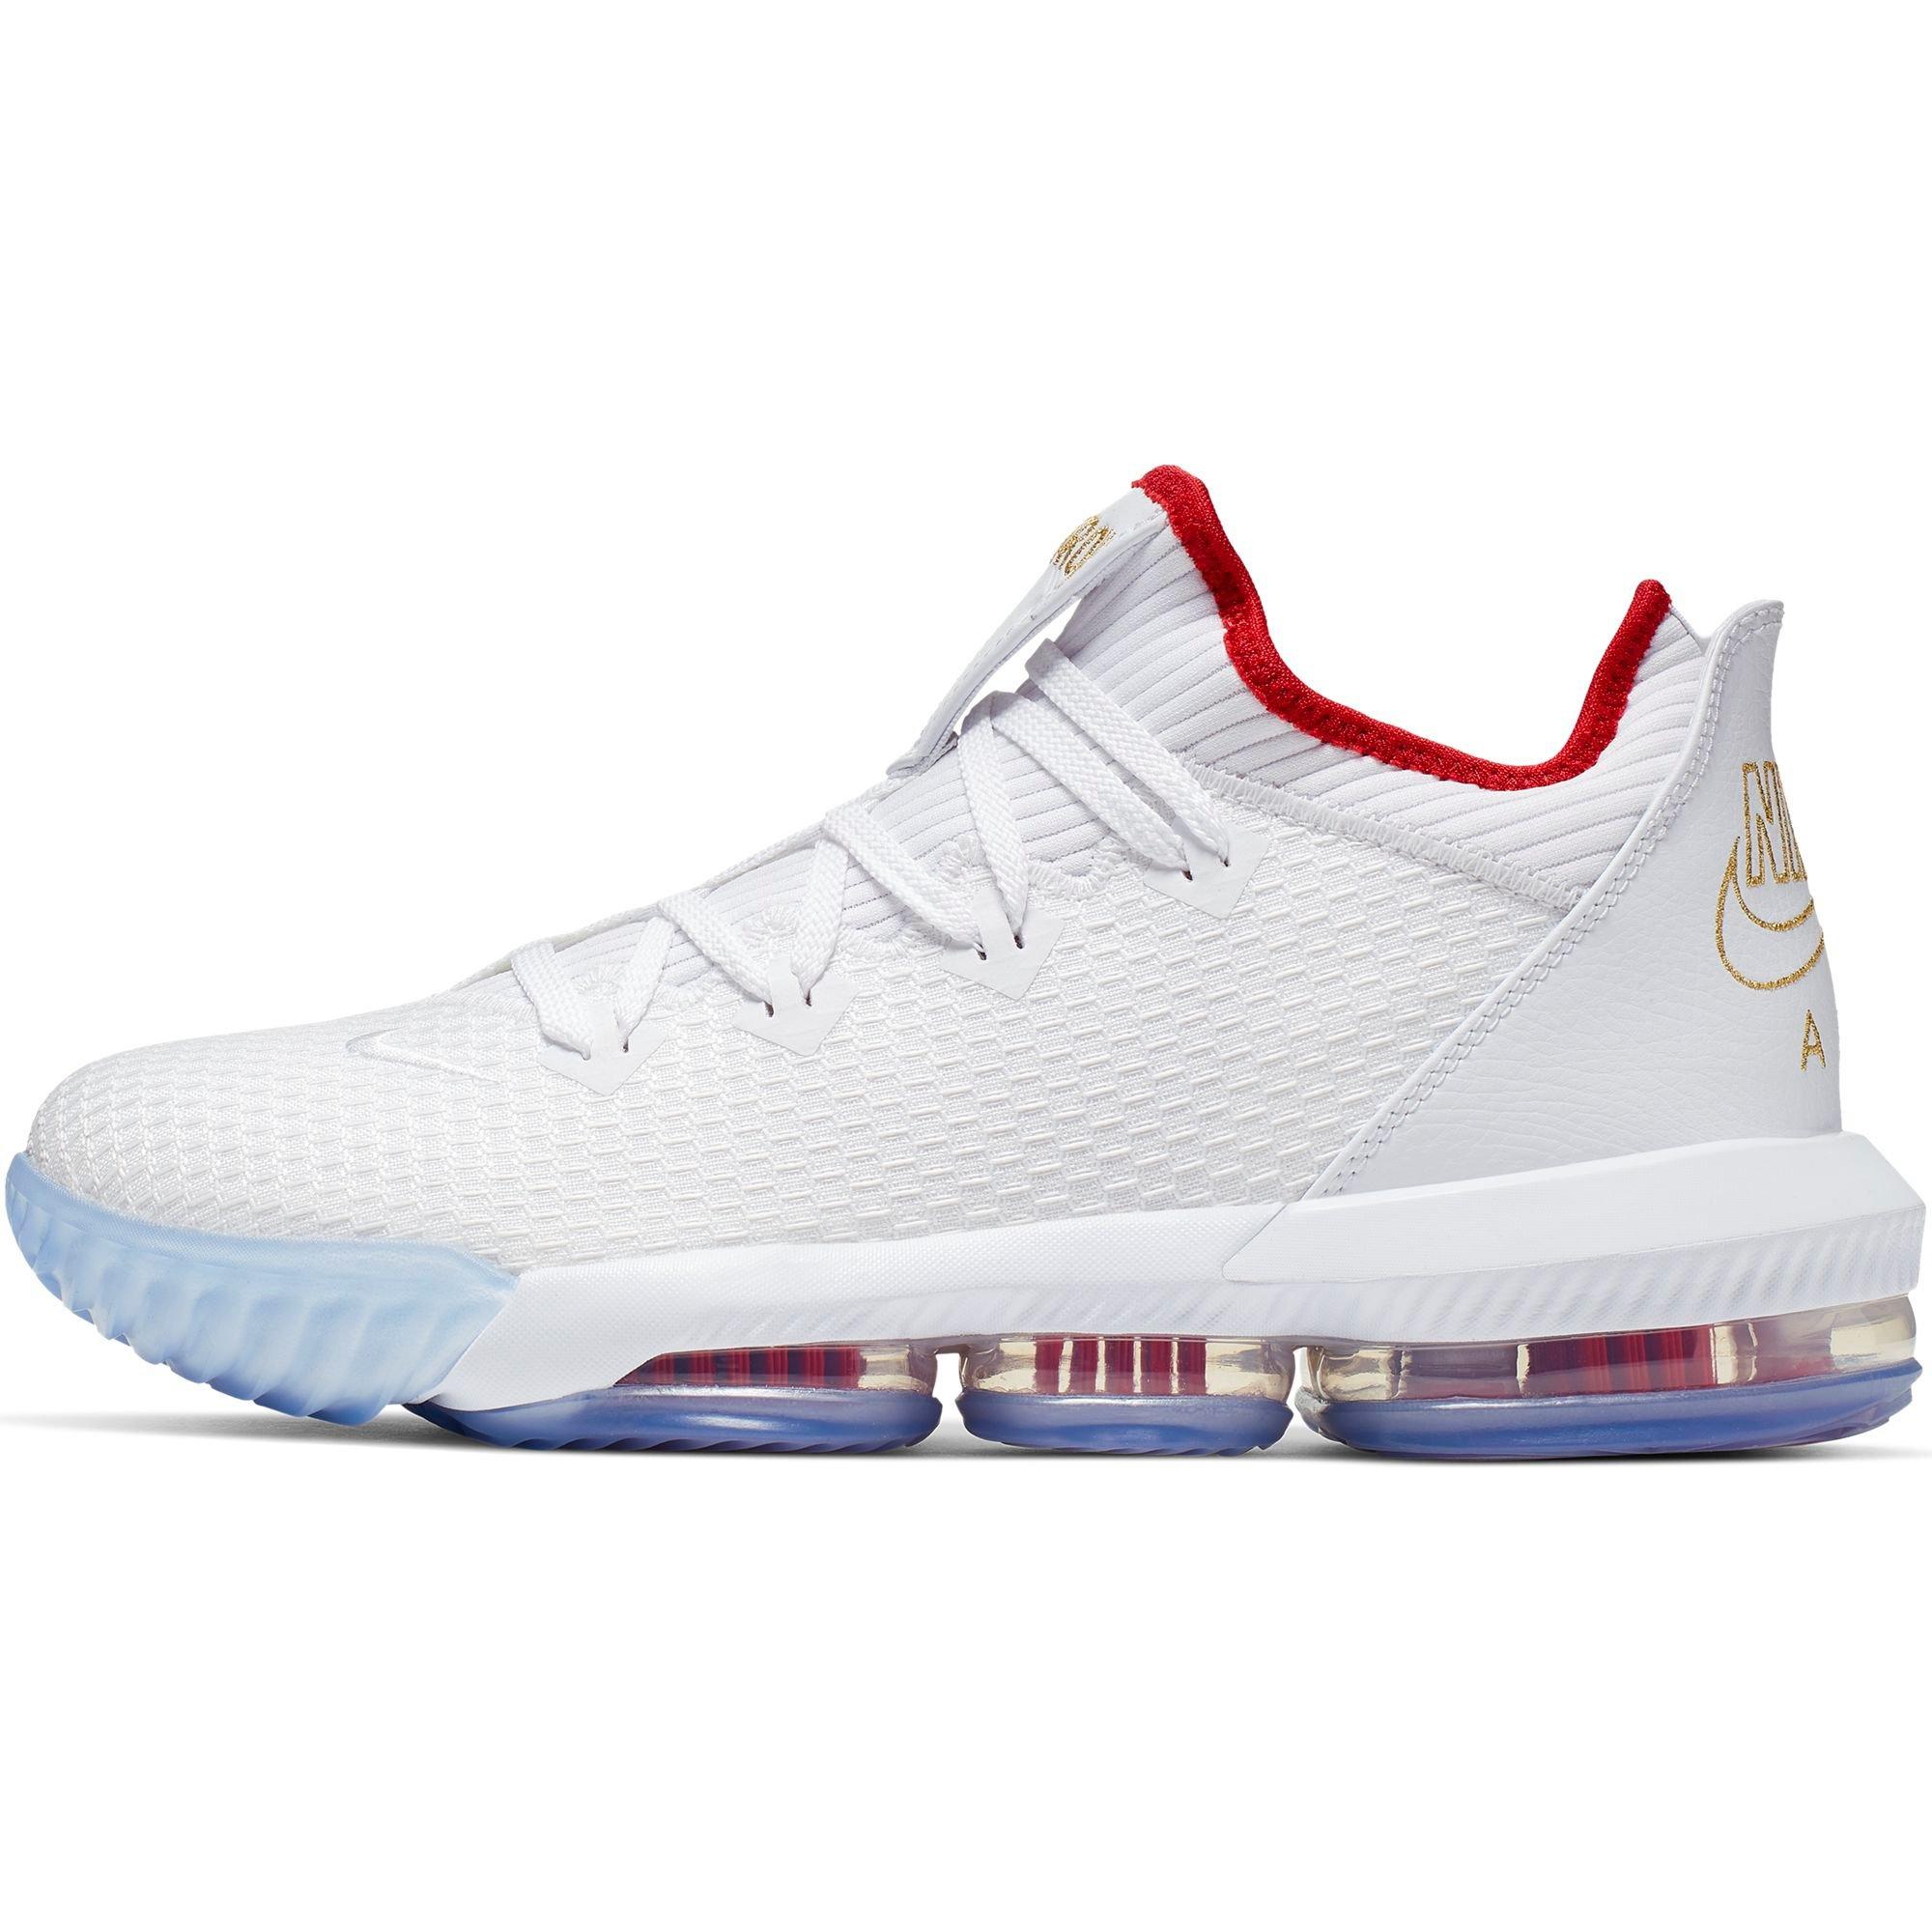 lebron 16 white and red